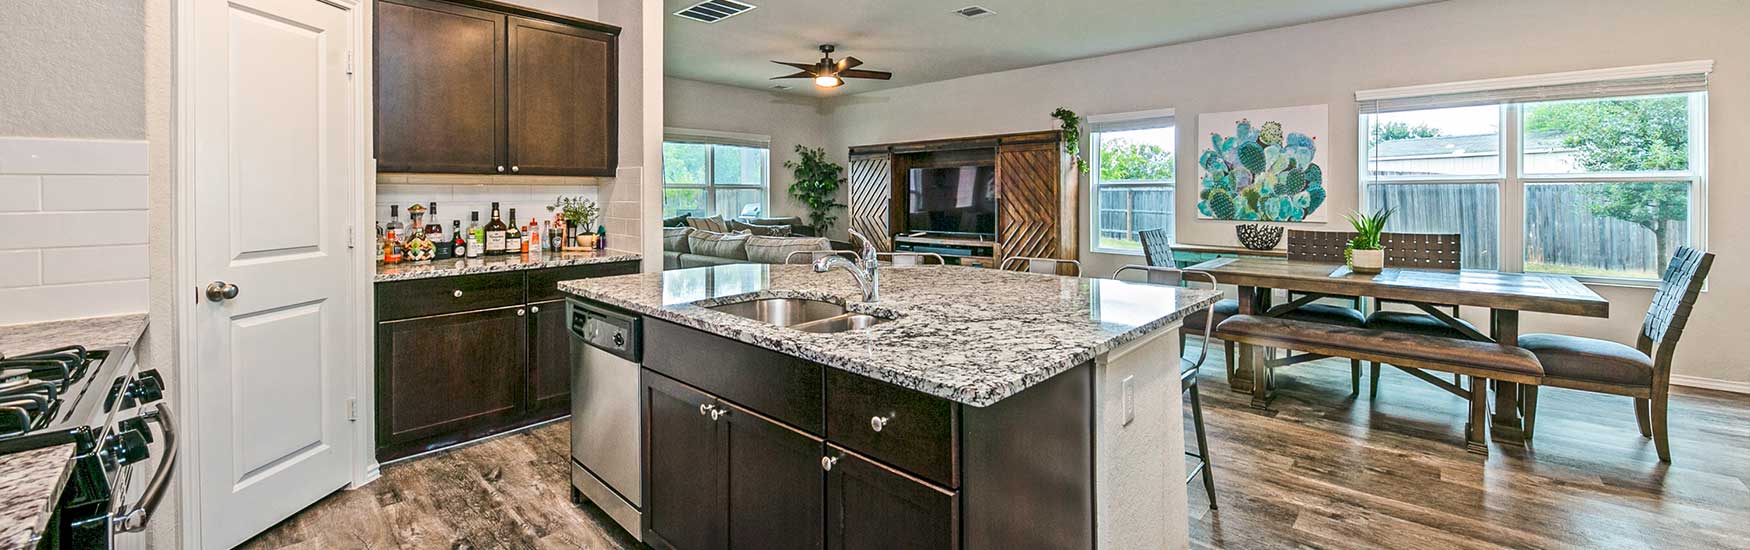 Open kitchen and dining room design with a marble countertop centerpiece available through TDY Haven Crash Pad in Schertz, TX